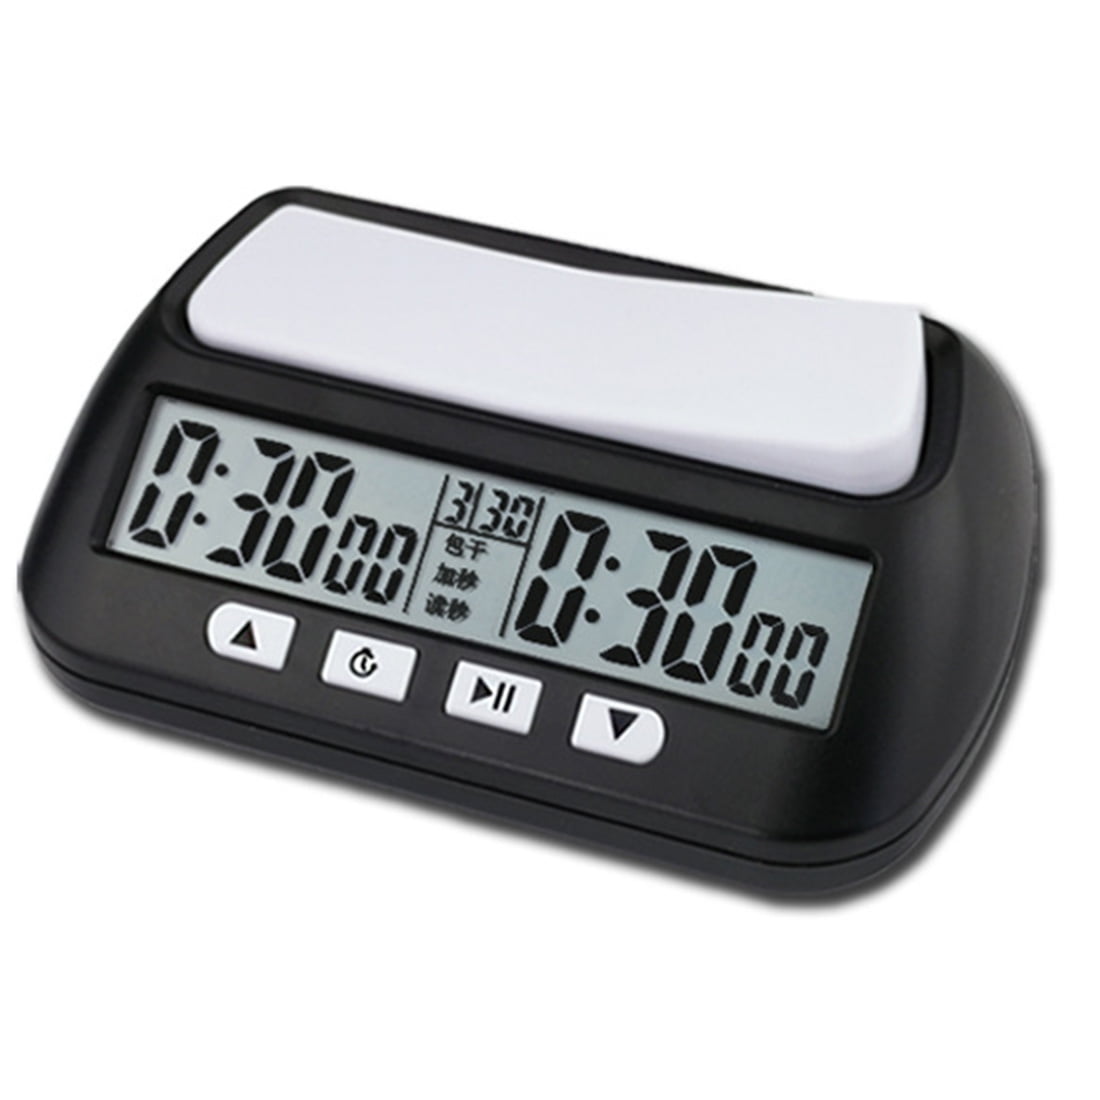 Details about   Travel Chess Digital Timer Chess Clock Count Up Down Board Game Clocks Black 